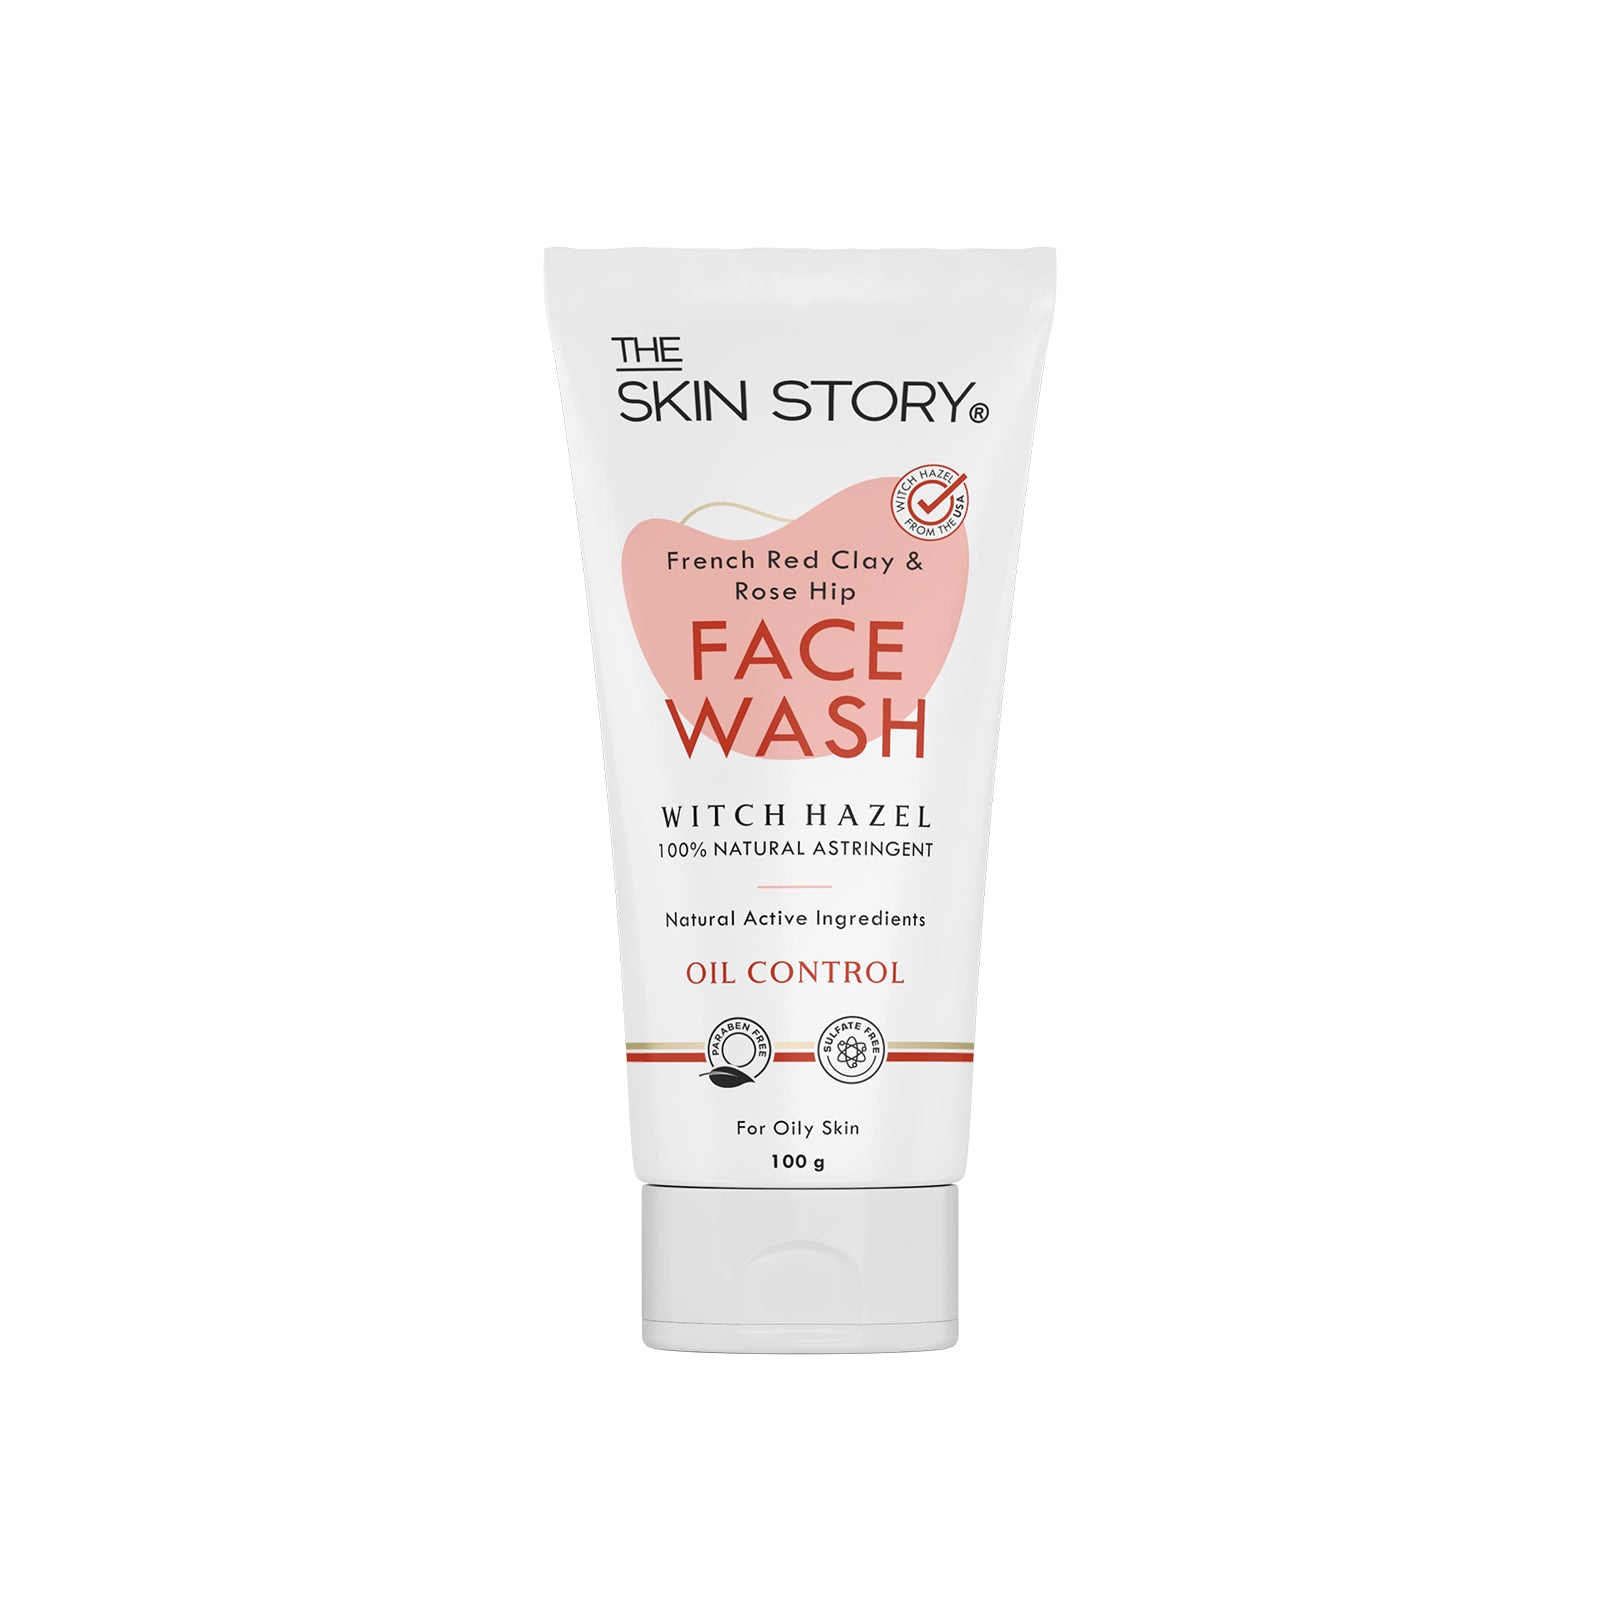 The Skin Story French Red Clay Facewash for Oily Skin |Pollution Control & Deep Cleansing | French Red Clay & Rosehip Oil | 100g